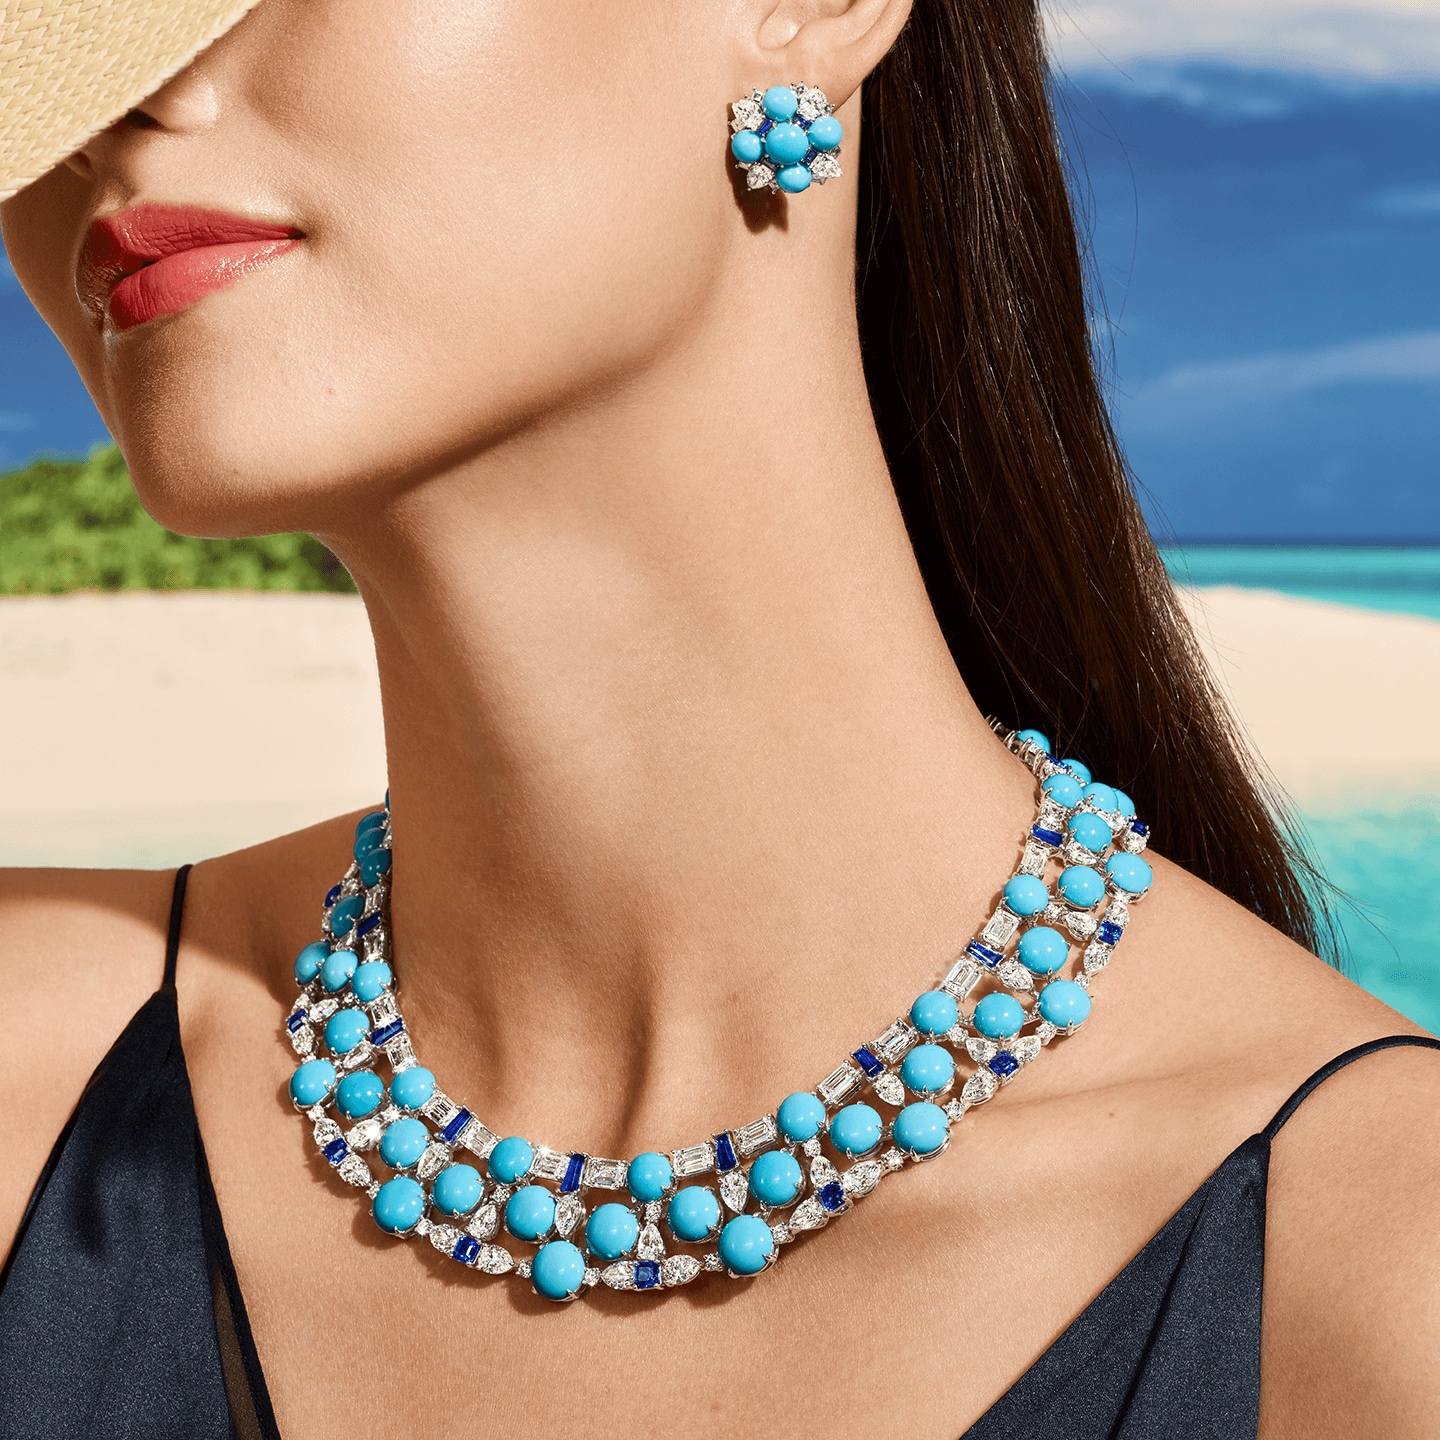 A female model in earrings and a necklace from Harry Winston's Fiji high jewelry suite.